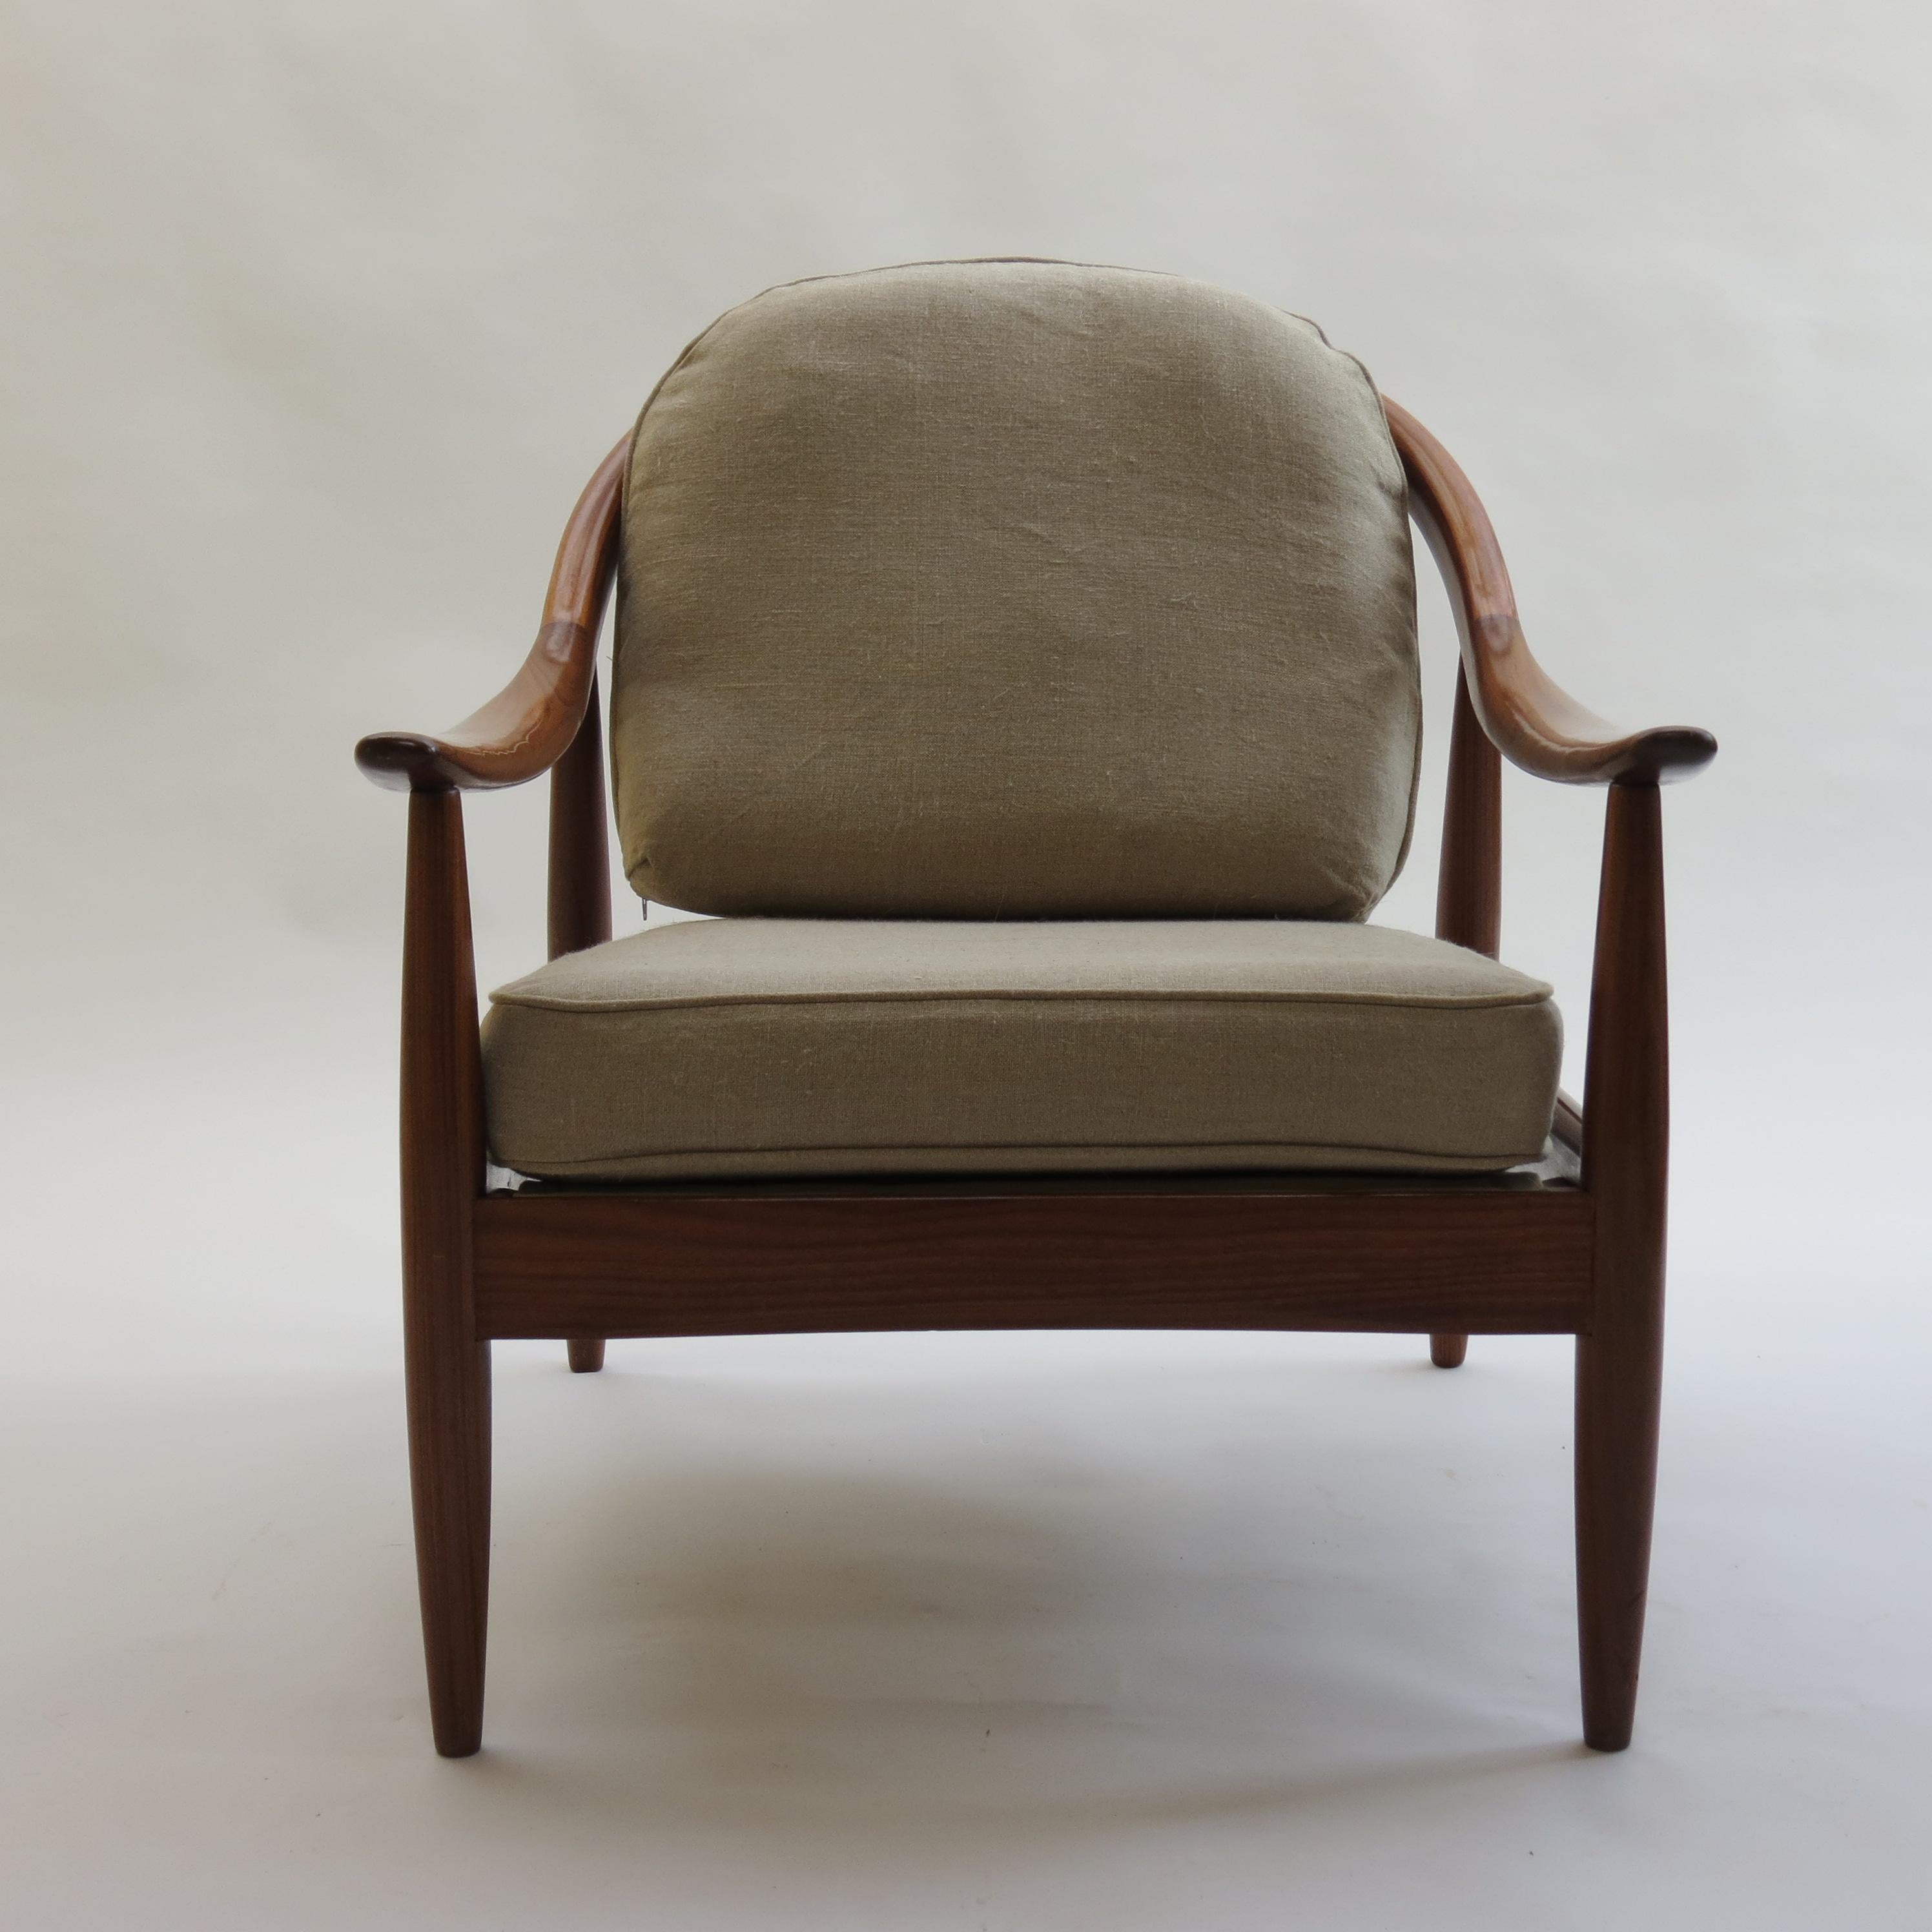 Afrormosia Midcentury Armchair by Greaves and Thomas 1960s B 3